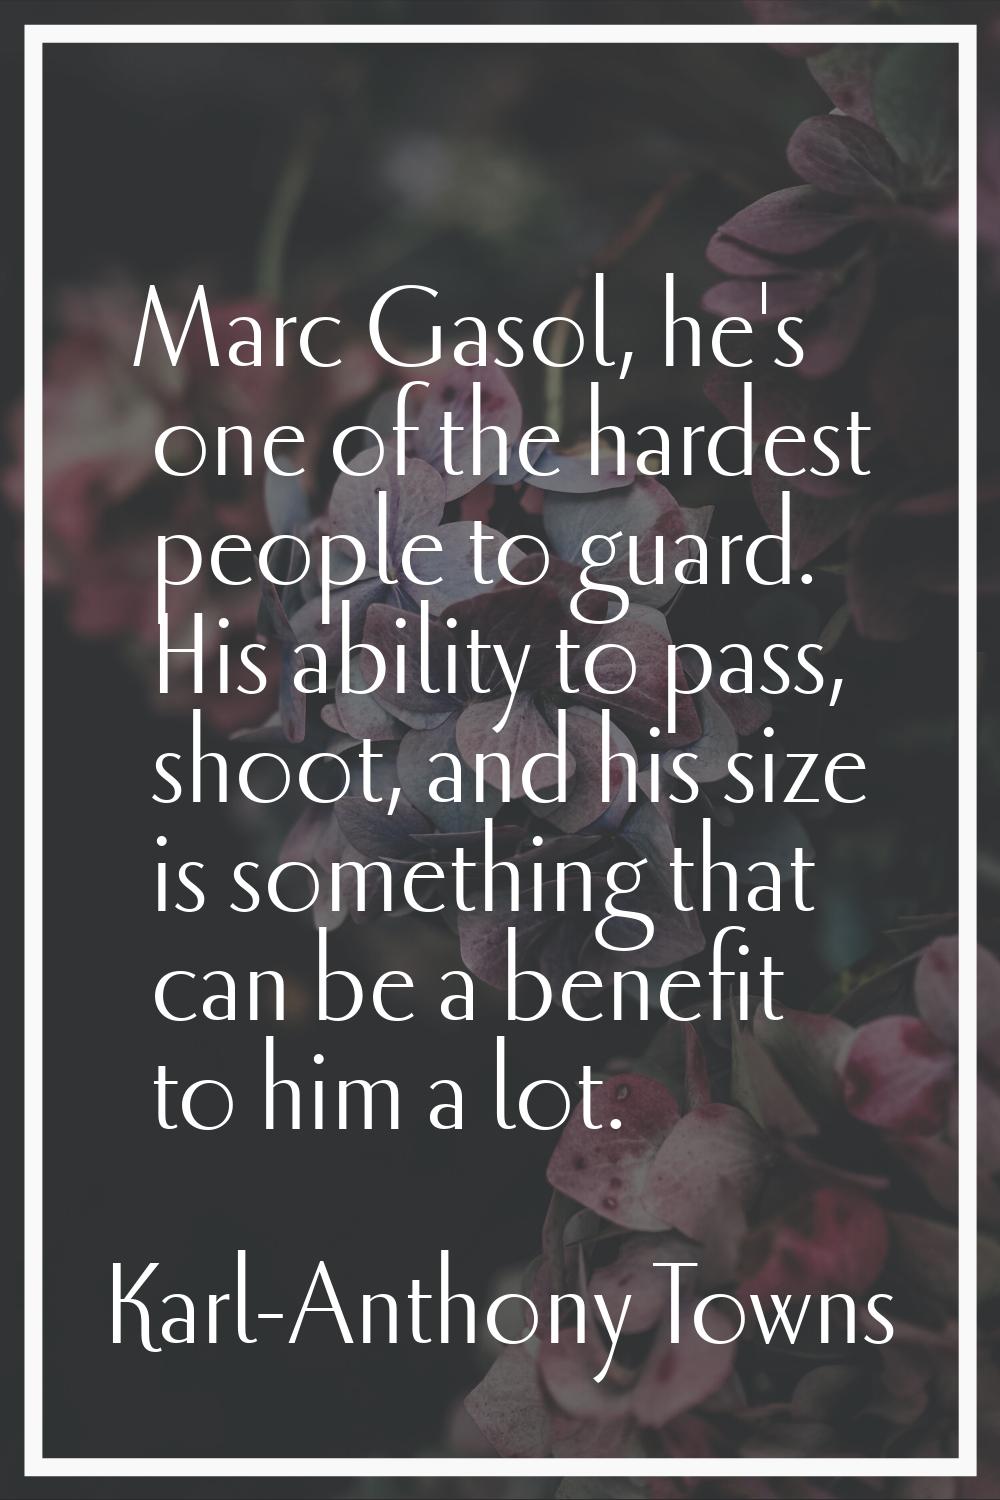 Marc Gasol, he's one of the hardest people to guard. His ability to pass, shoot, and his size is so